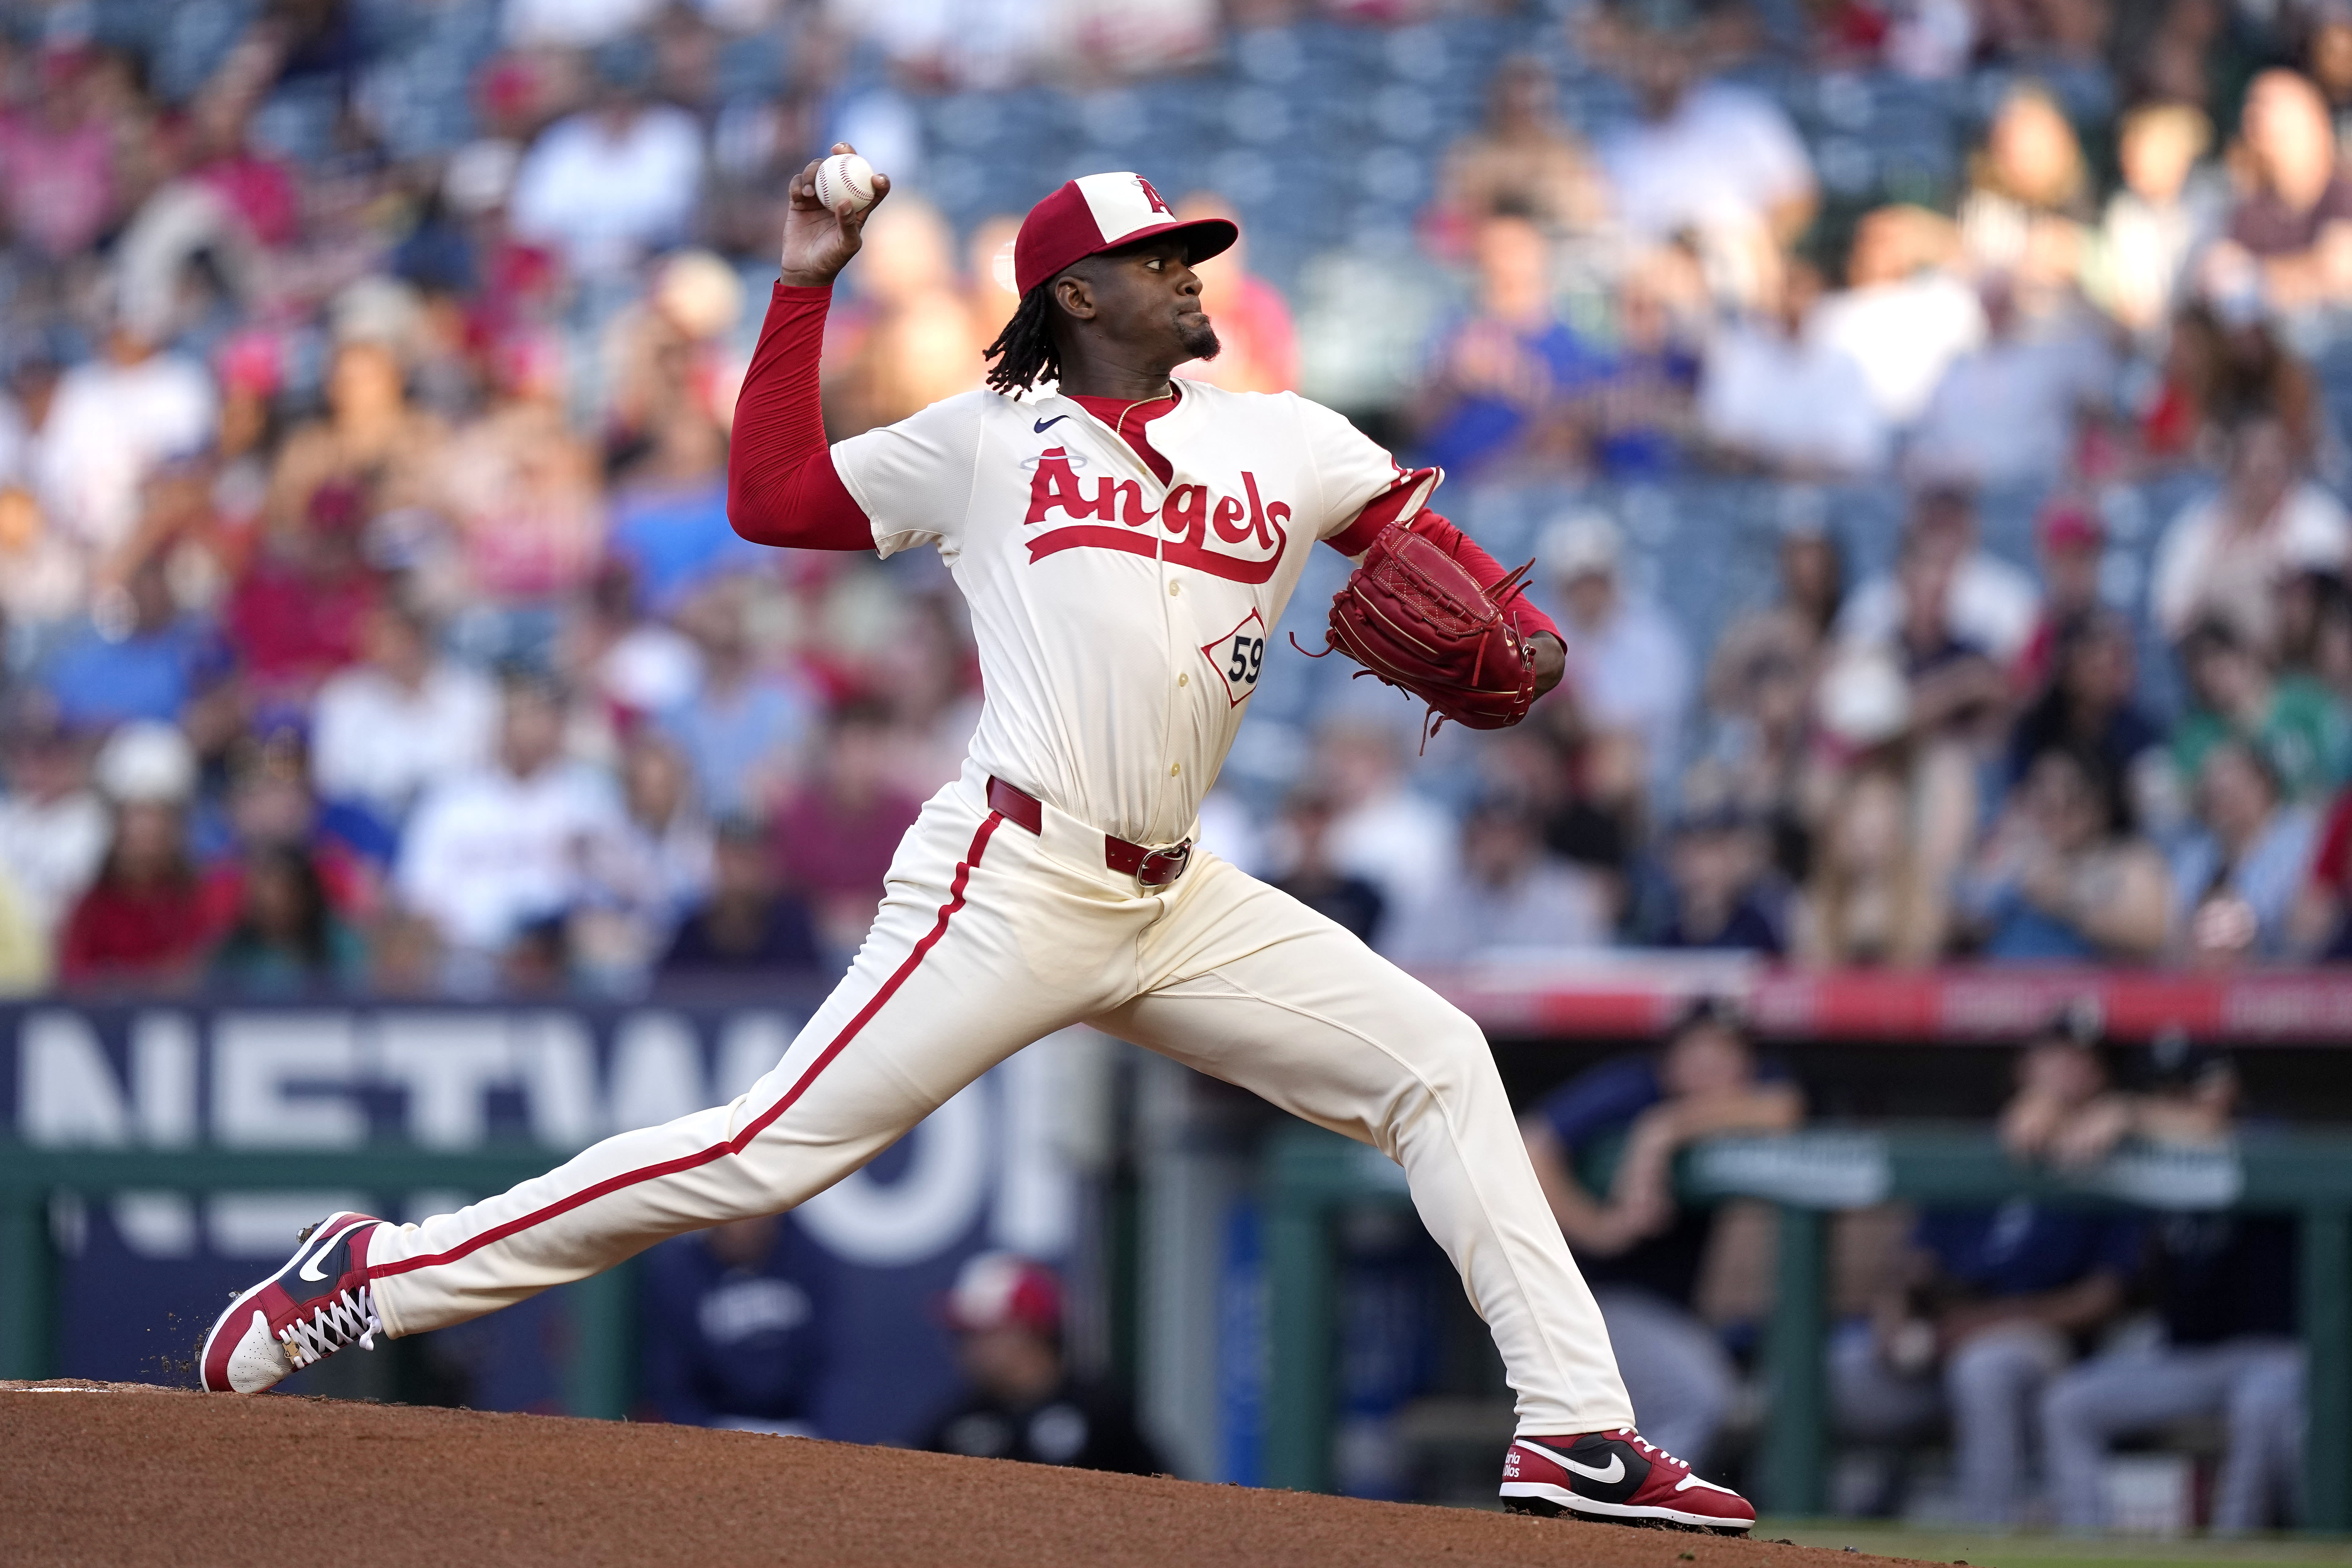 Soriano leads the Los Angeles Angels' strong mound effort in a 2-1 victory over the Seattle Mariners